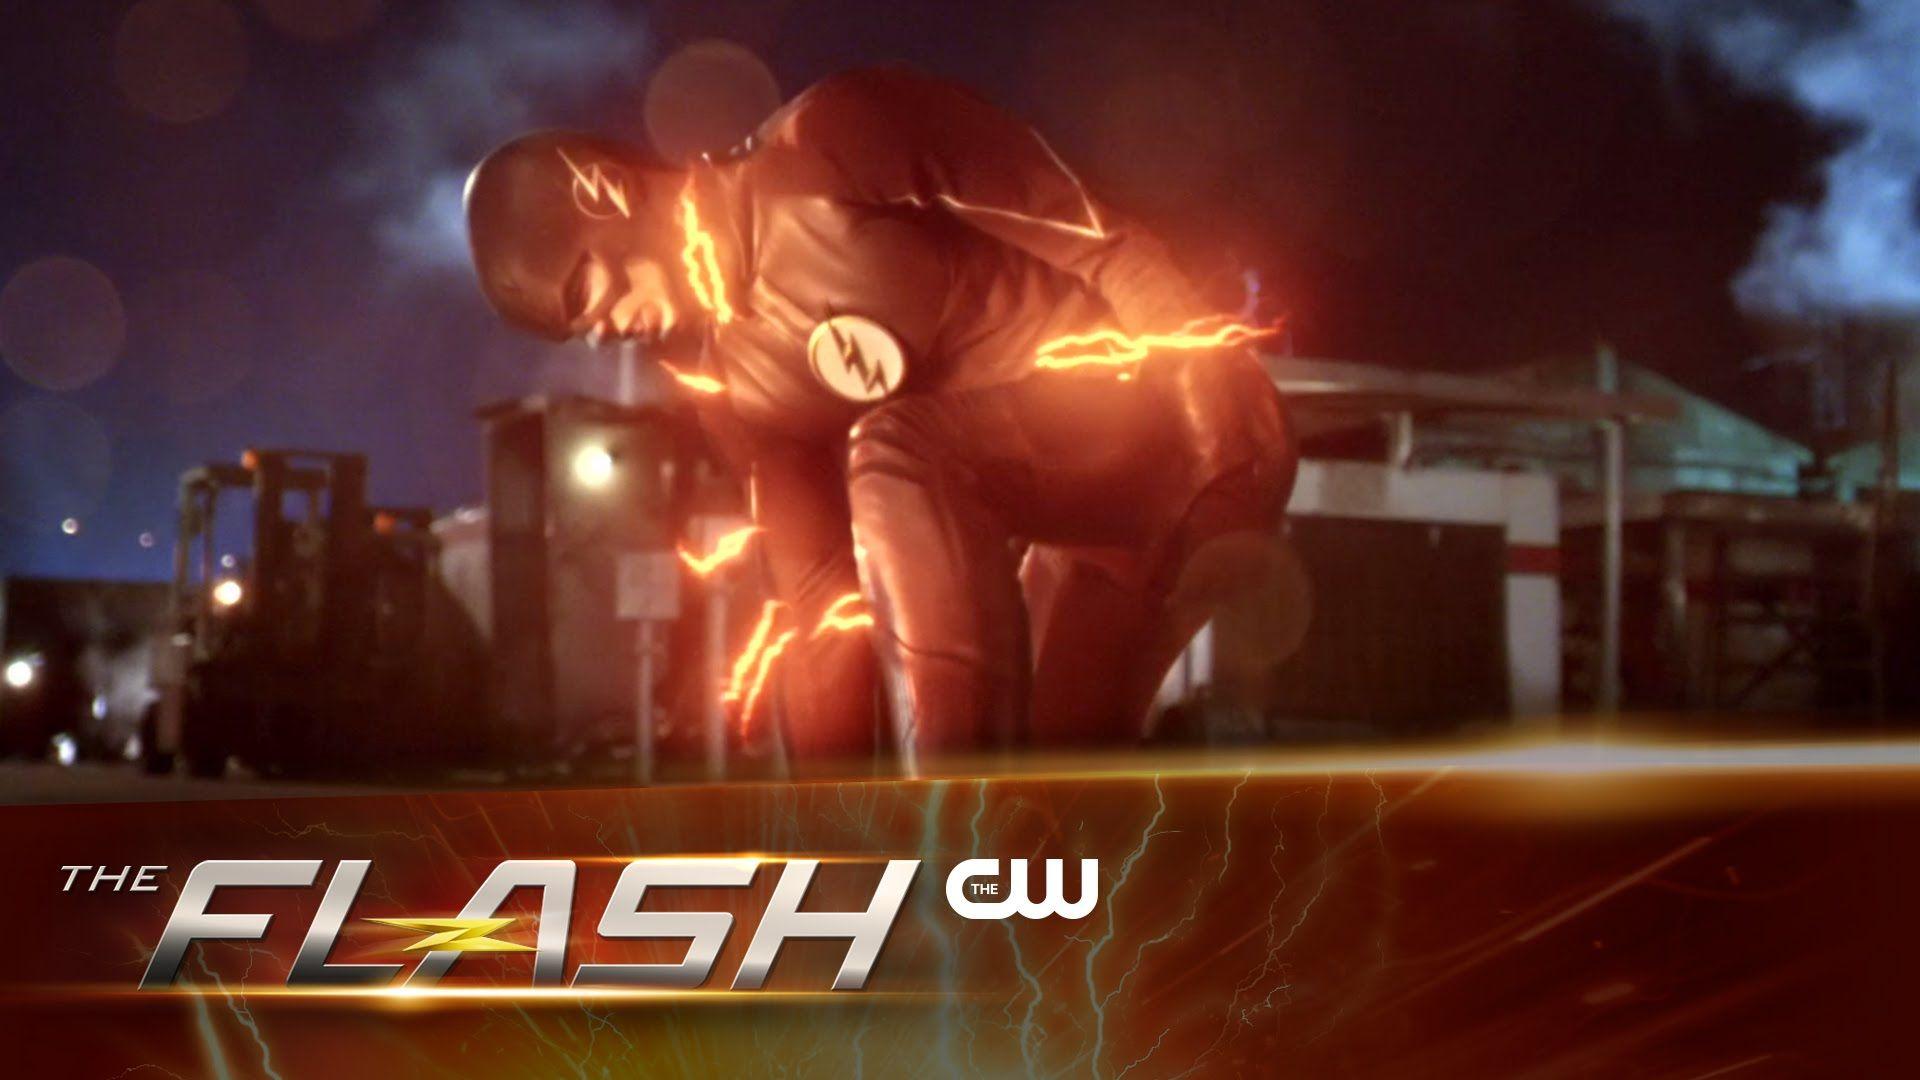 The Flash Cw Wallpaper (Picture)